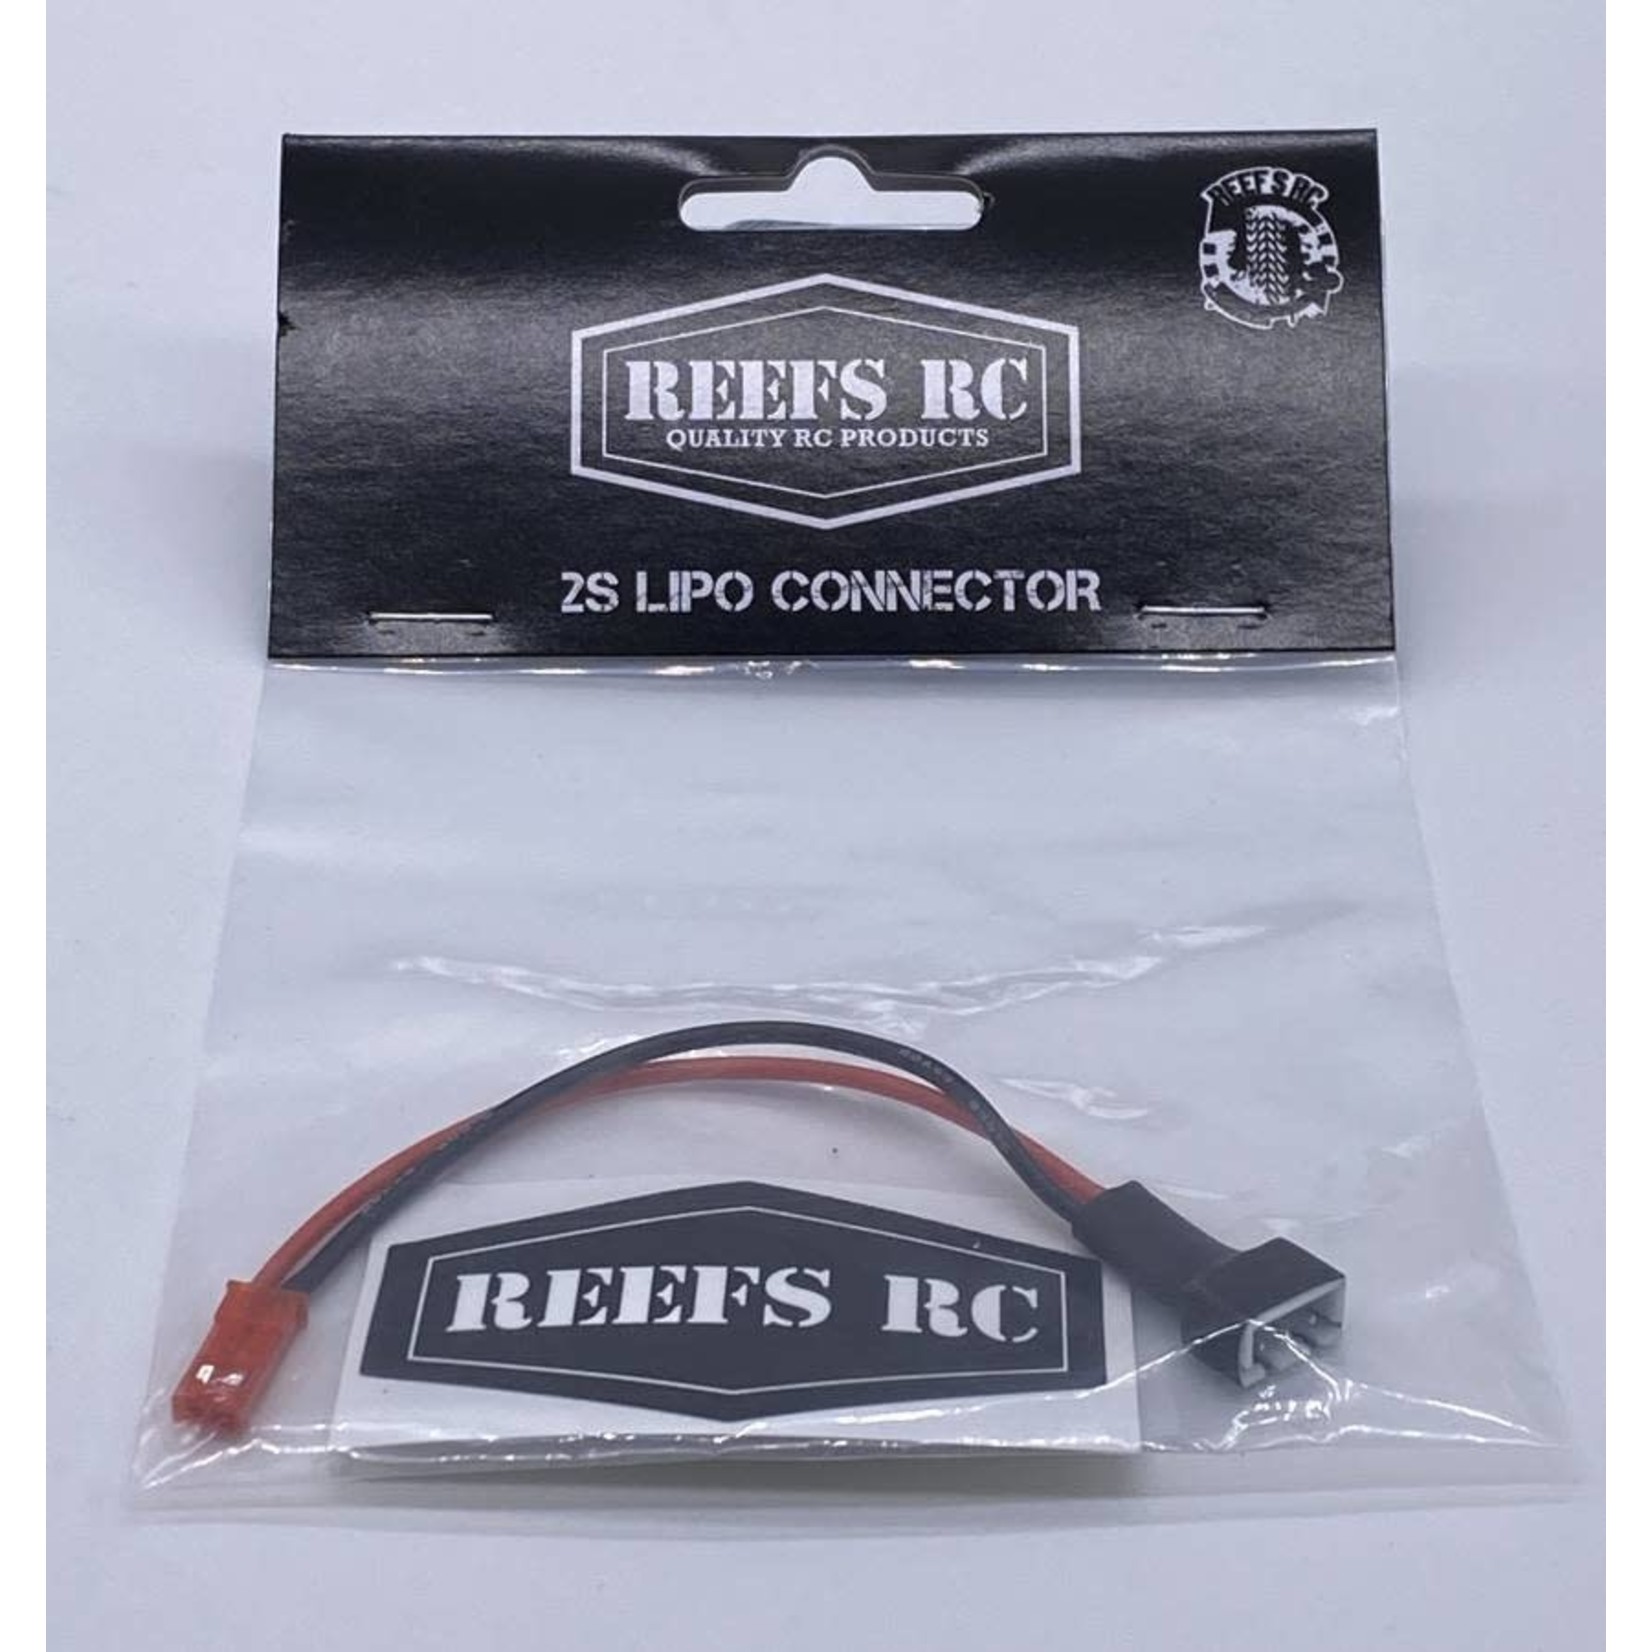 Reefs 2S Lipo Connector for Servo Power